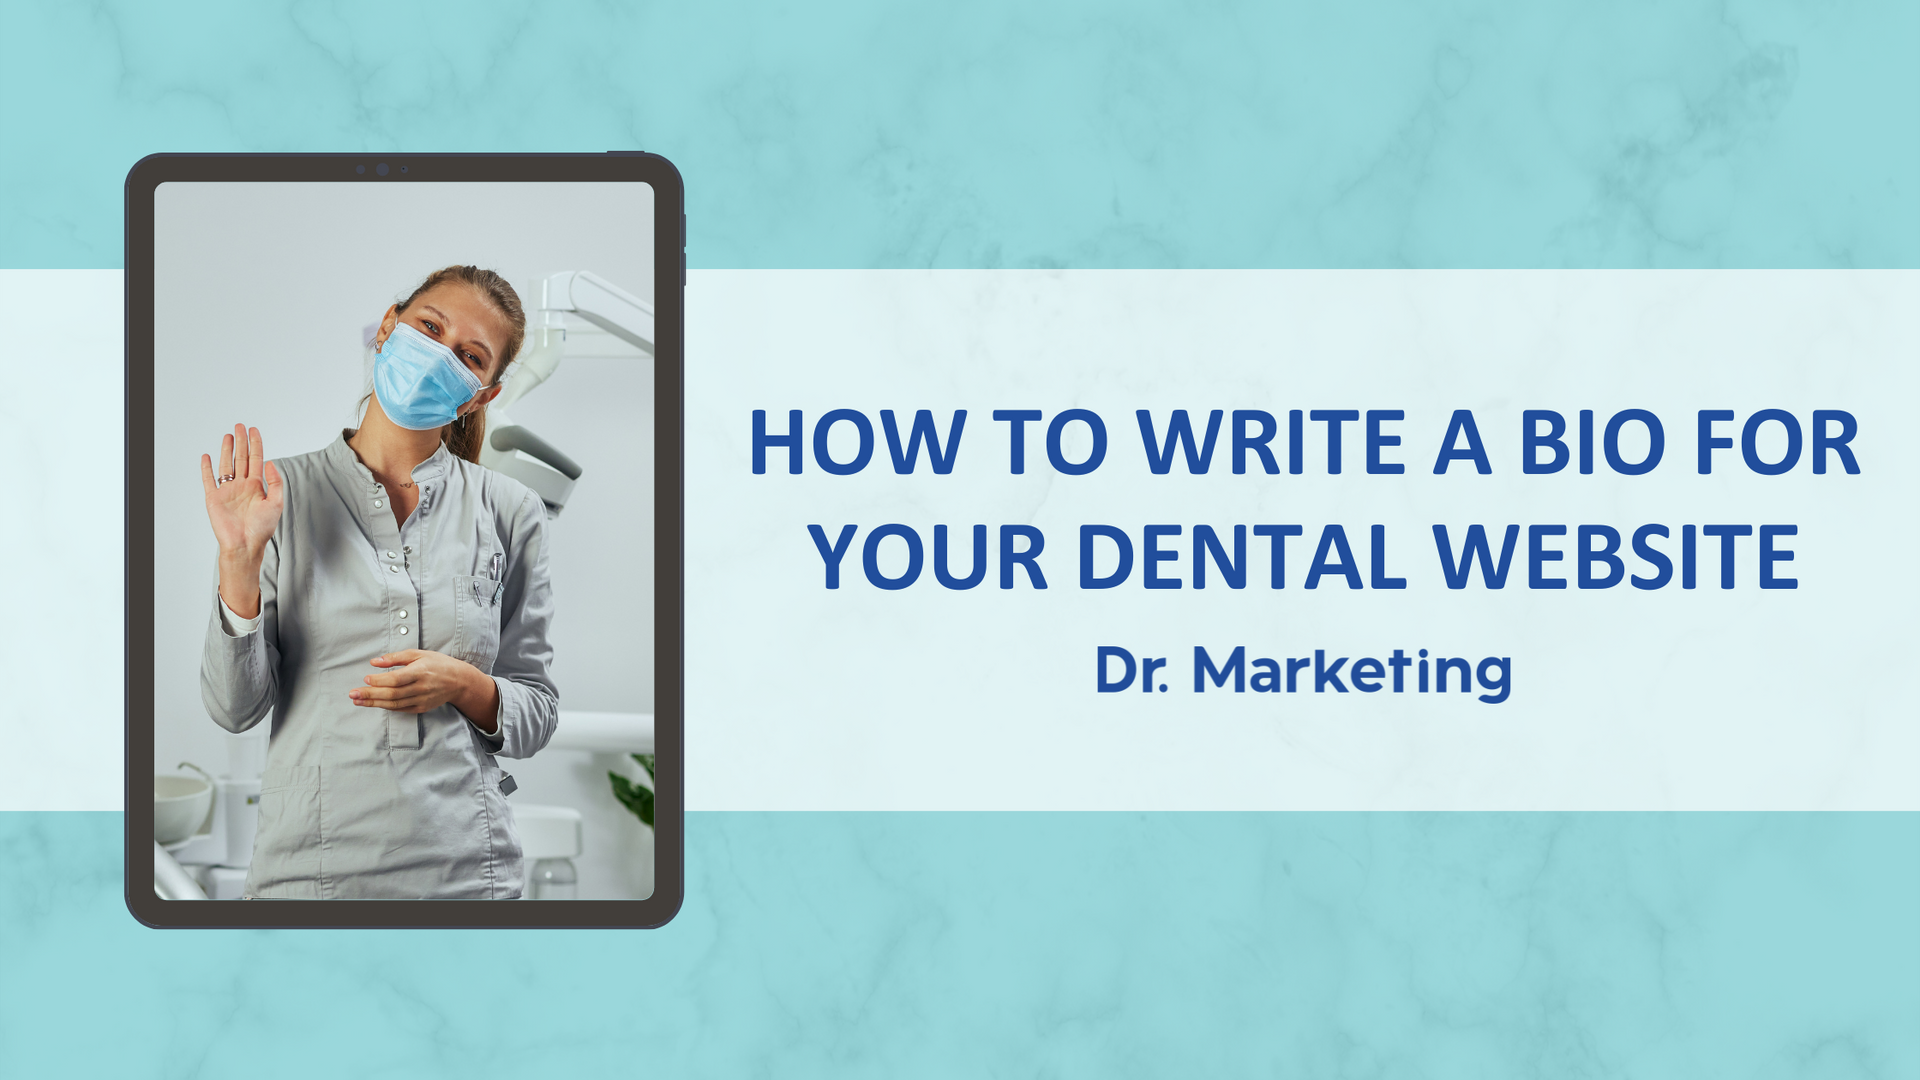 Waving dentist photo on ipad with title How To Write a Bio for Your Dental Website